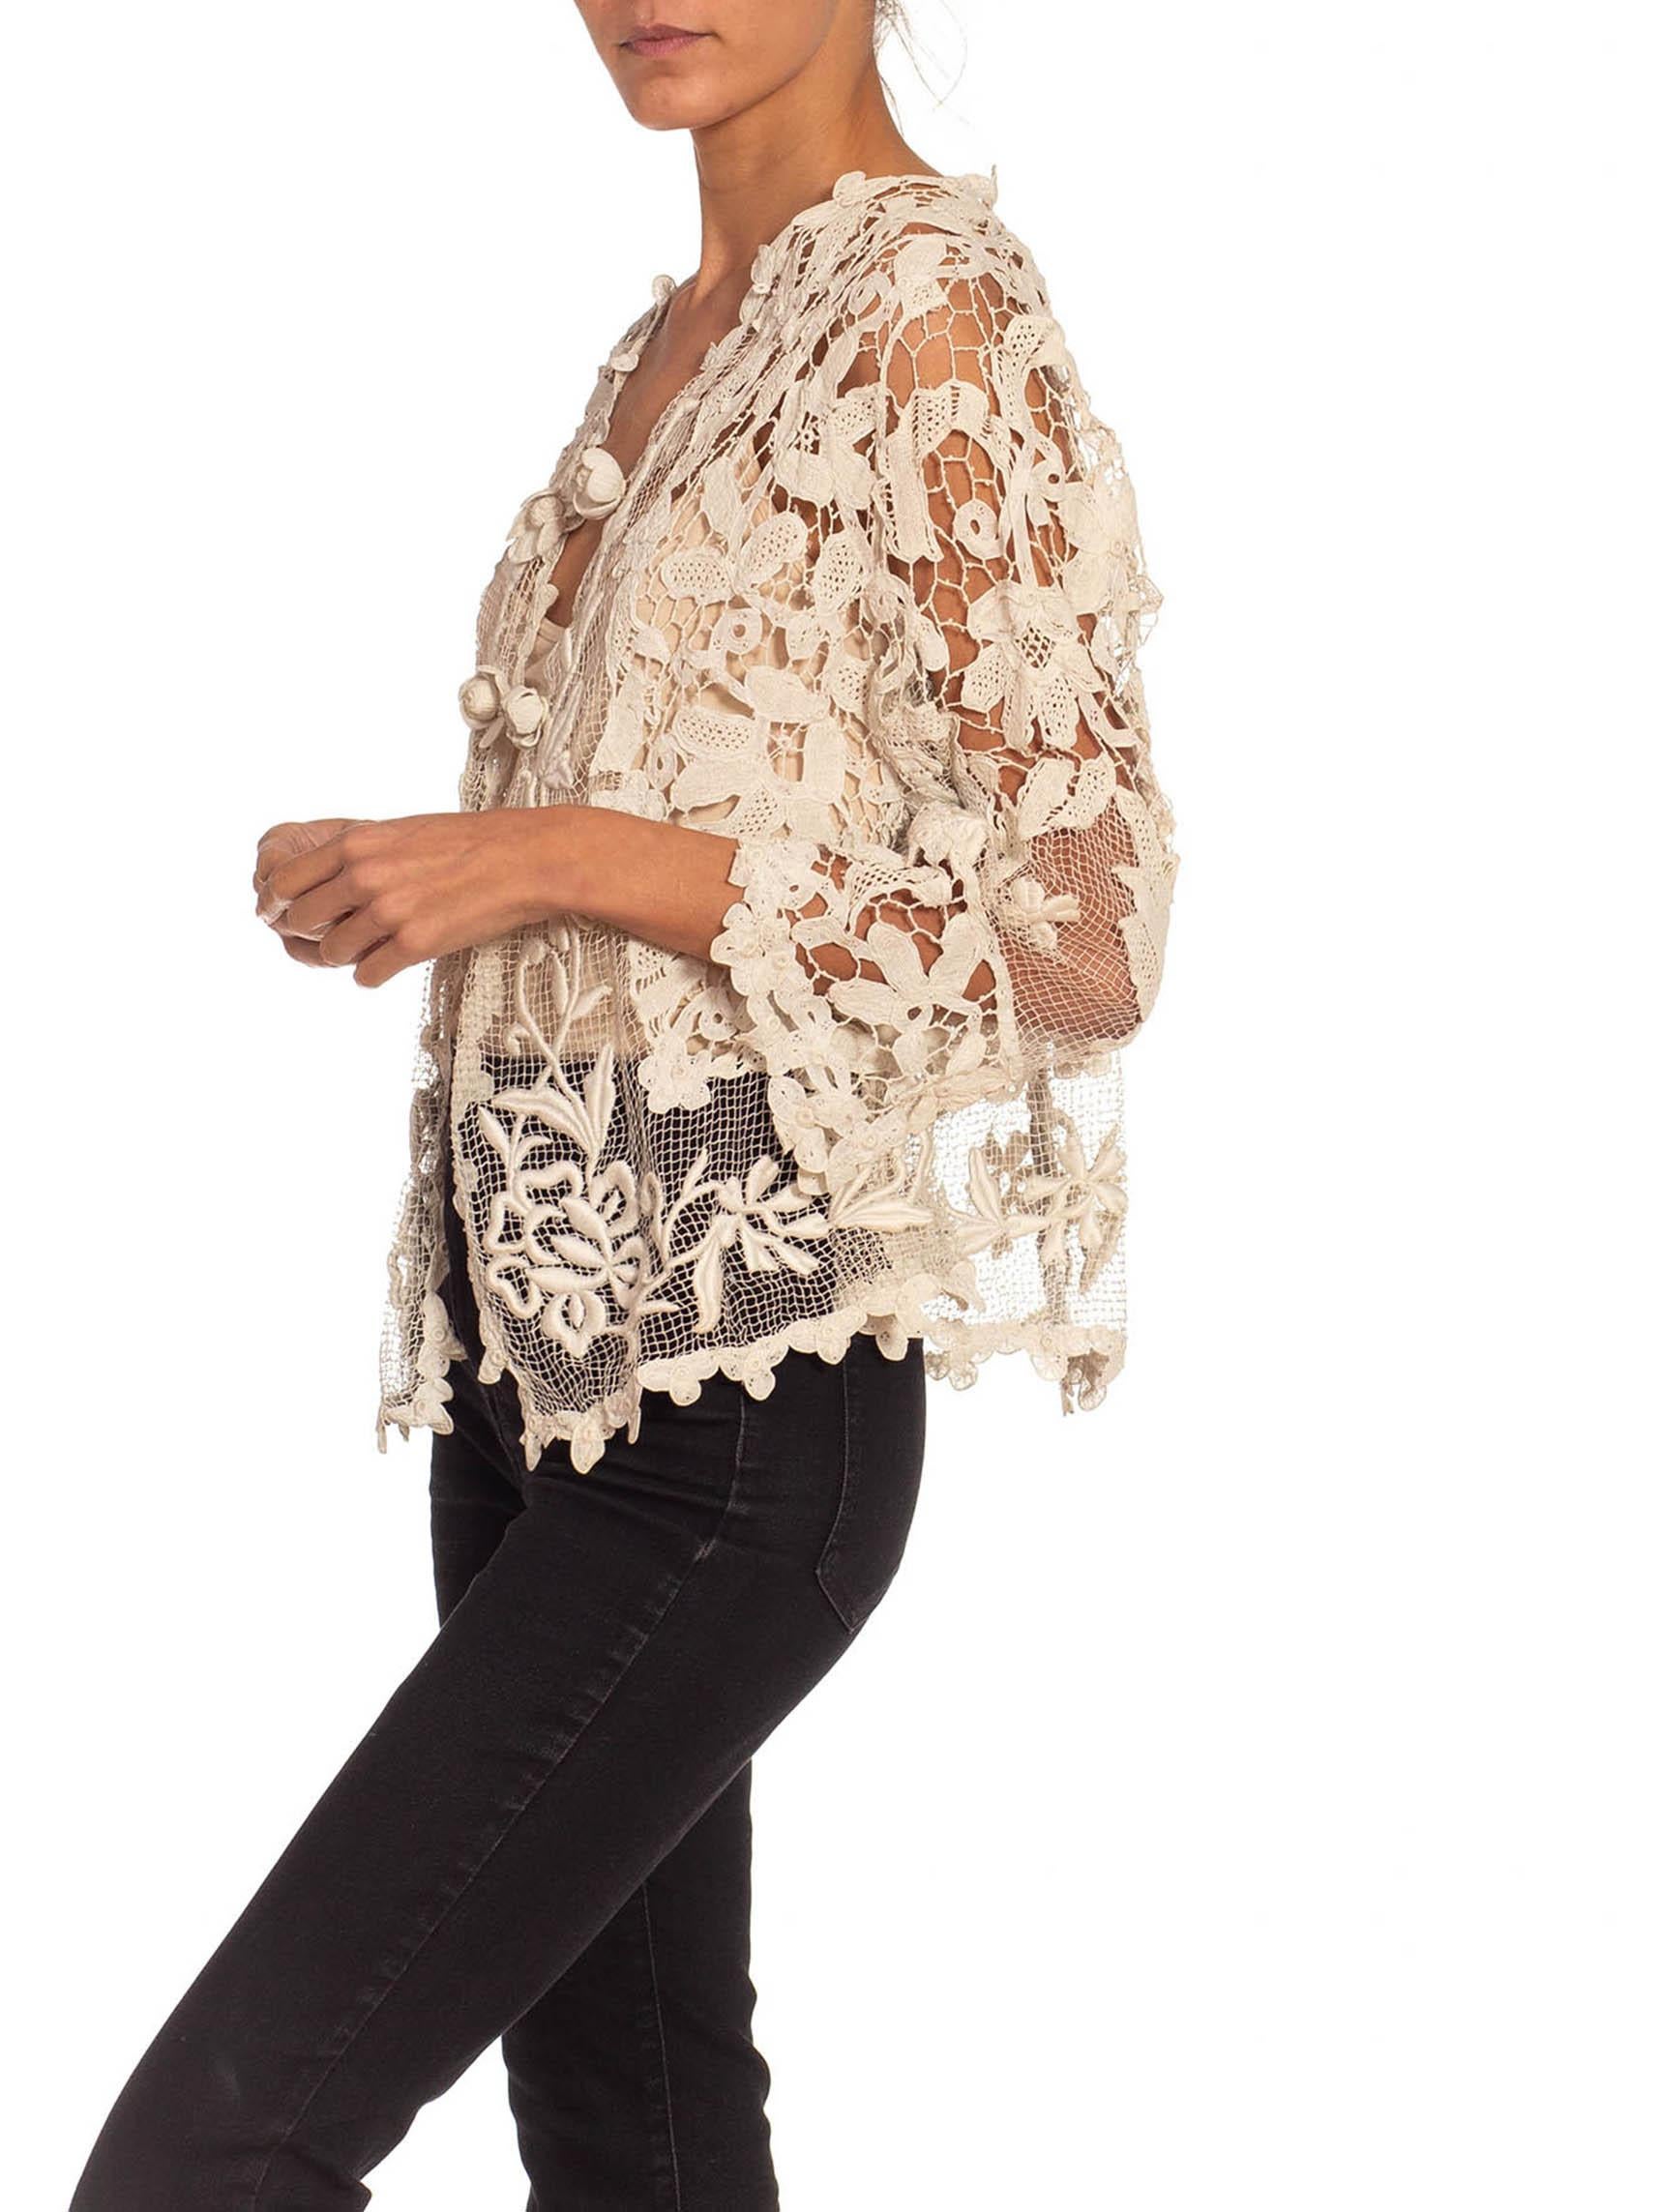 Women's Victorian Off White Needle Lace Long Sleeve Jacket With Flower Hooks For Sale